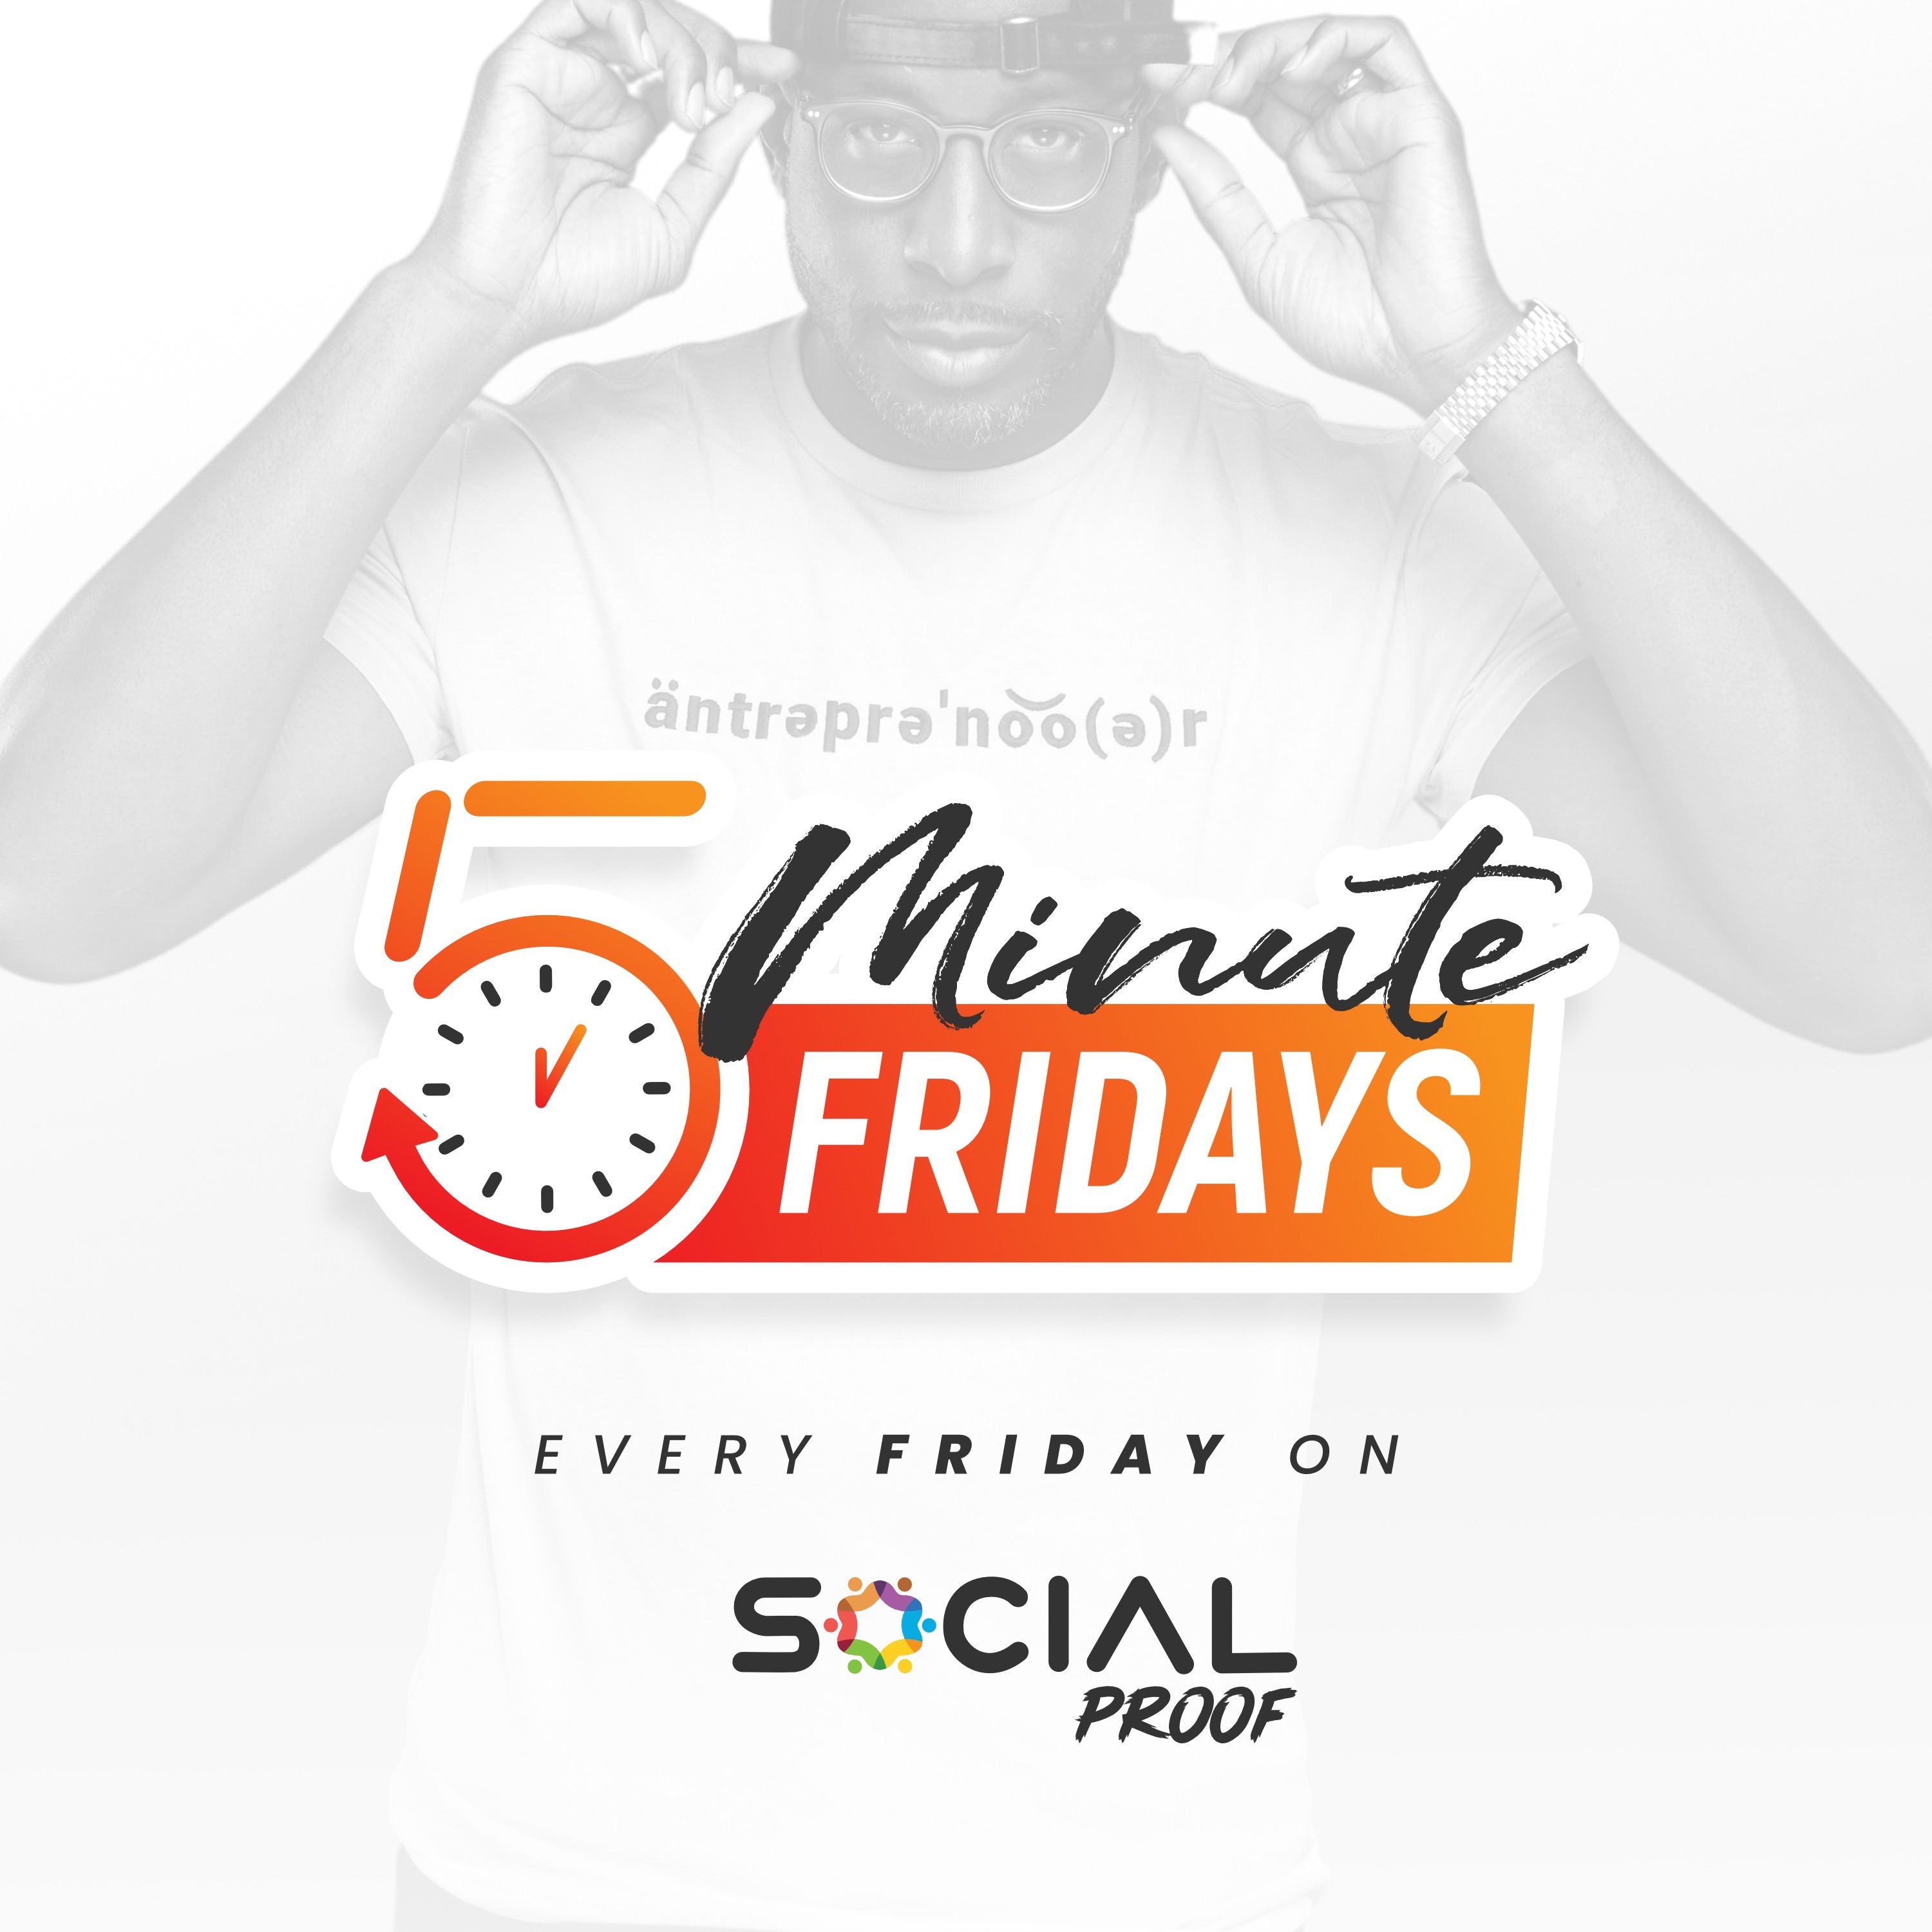 Attach You Brand To Things That Are Familiar - 5 MINUTE FRIDAYS